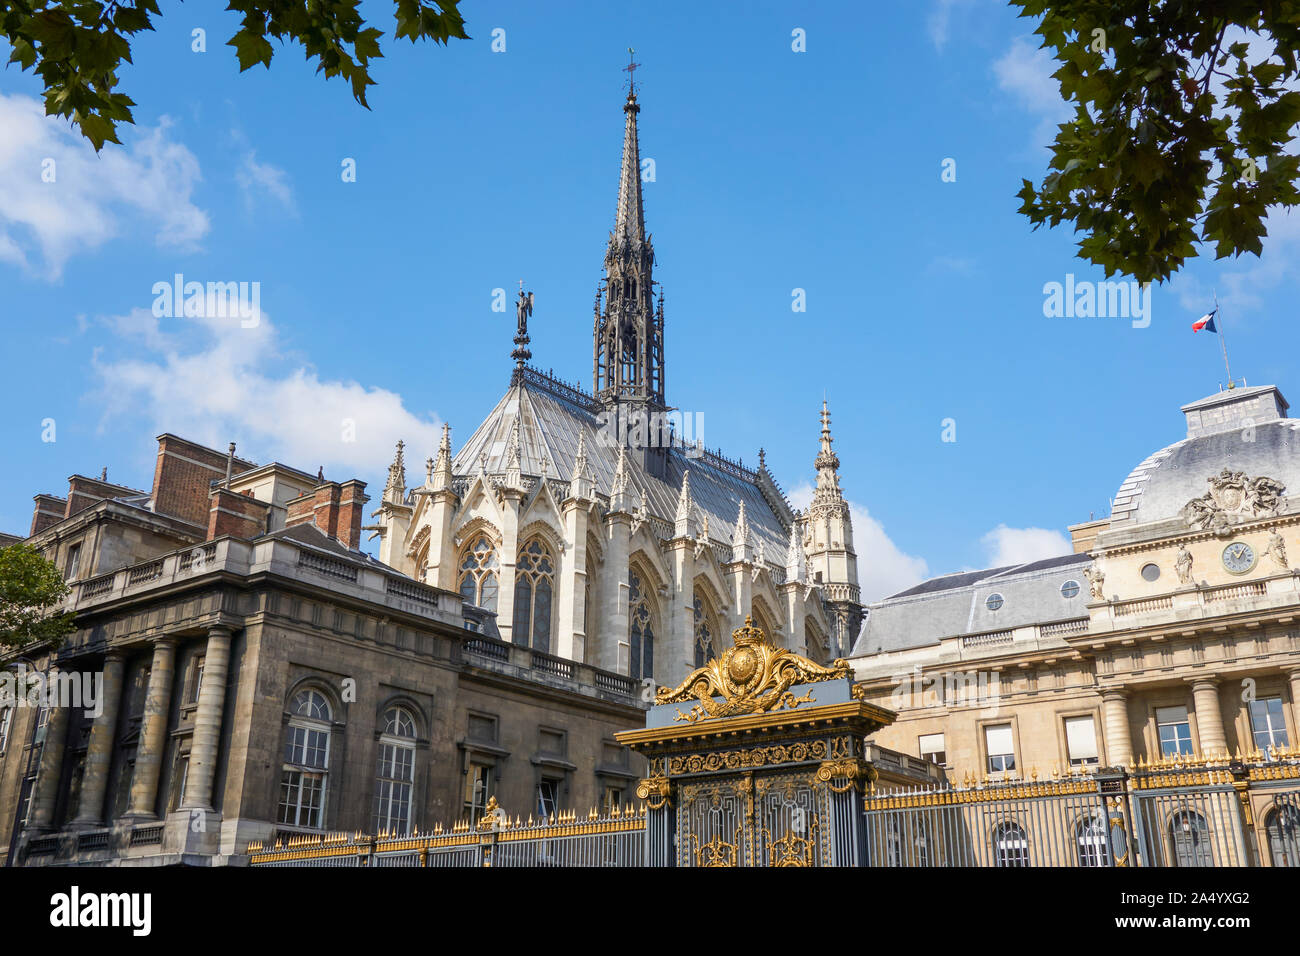 Exterior view of the holy chapel (Sainte Chapelle) in Paris, France. Gothic royal medieval church located in the center of Paris and one of the most f Stock Photo